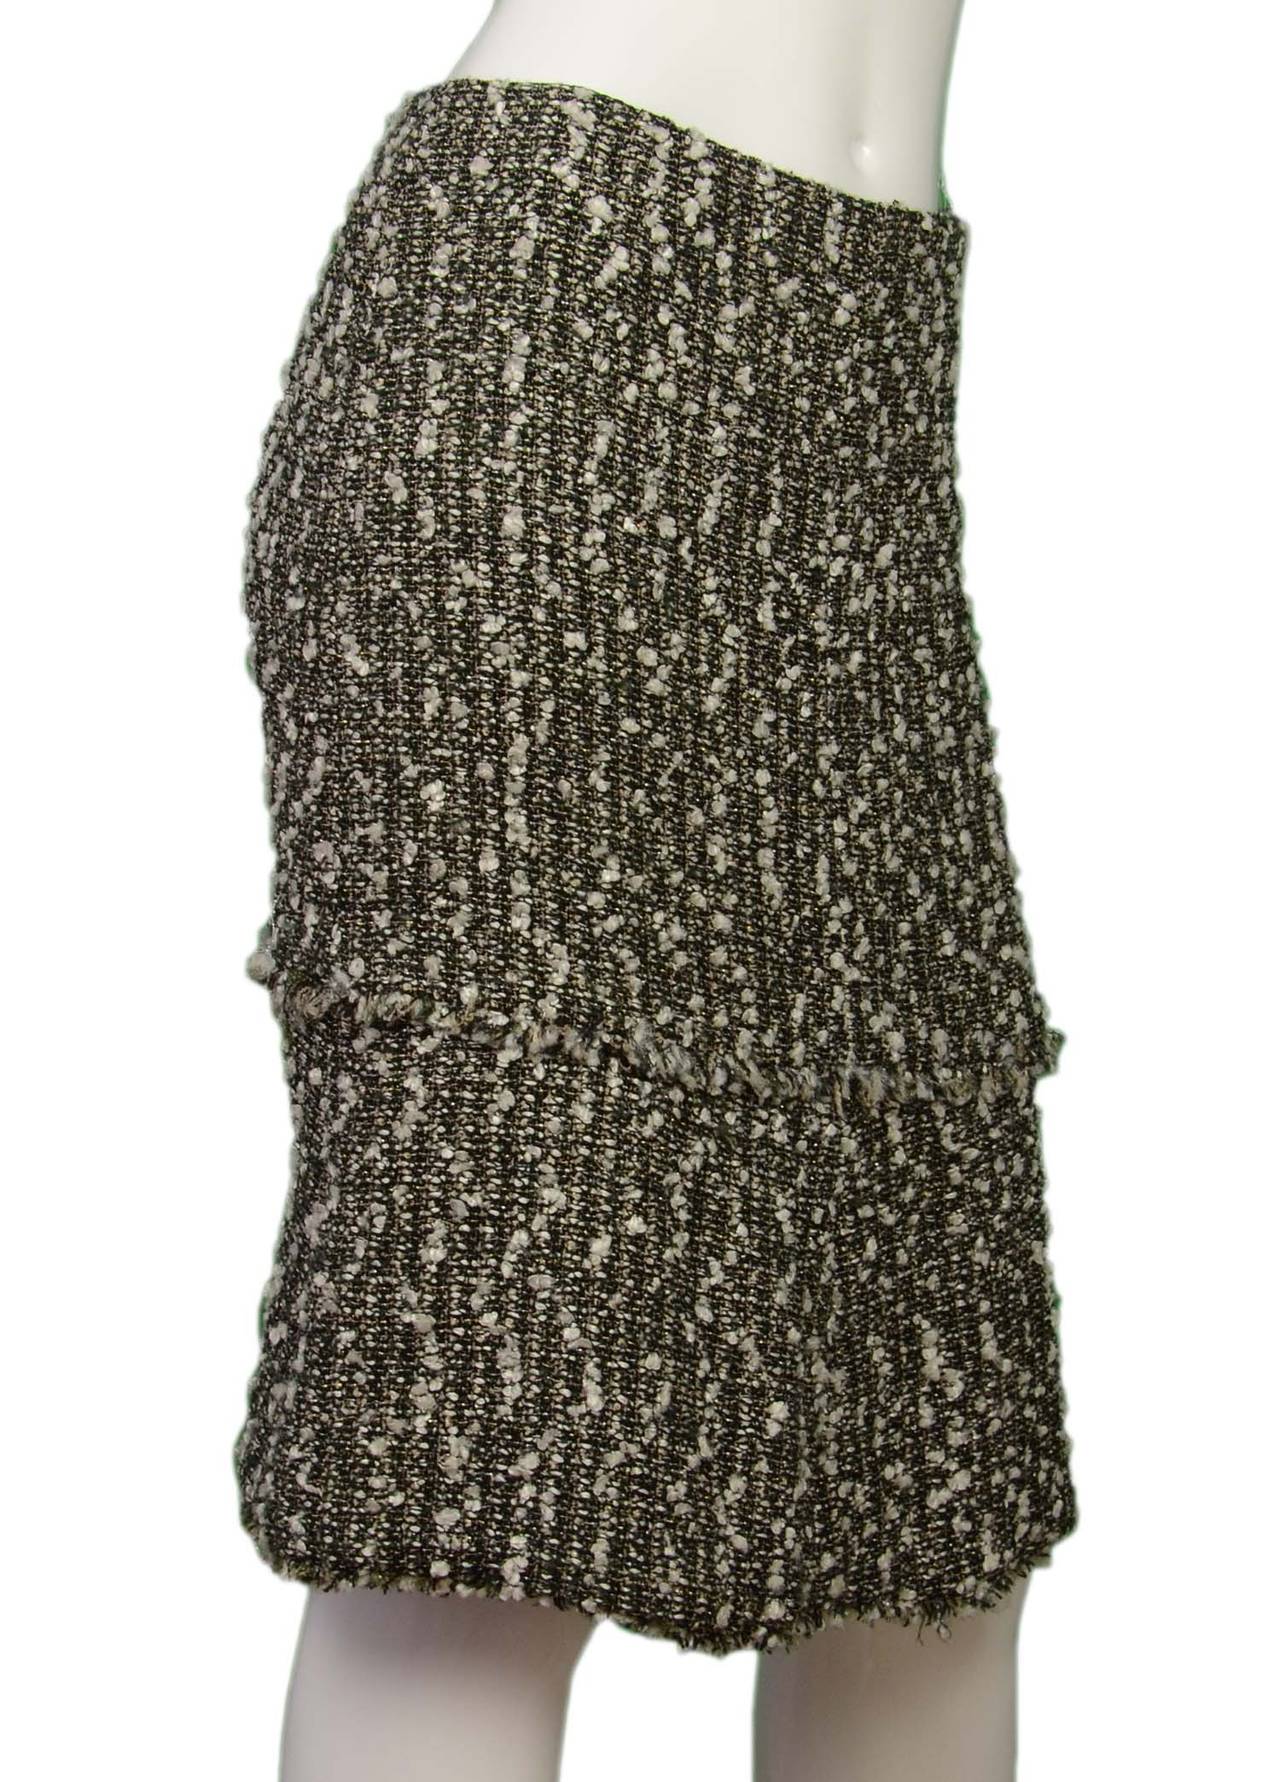 Chanel Black & White Tweed Trumpet Skirt
Features silver/sparkle thread woven into tweed to give a hint of glitter to the look

    Made in: France
    Year of Production: 2004
    Color: Black and white
    Composition: 46% rayon, 27% nylon,